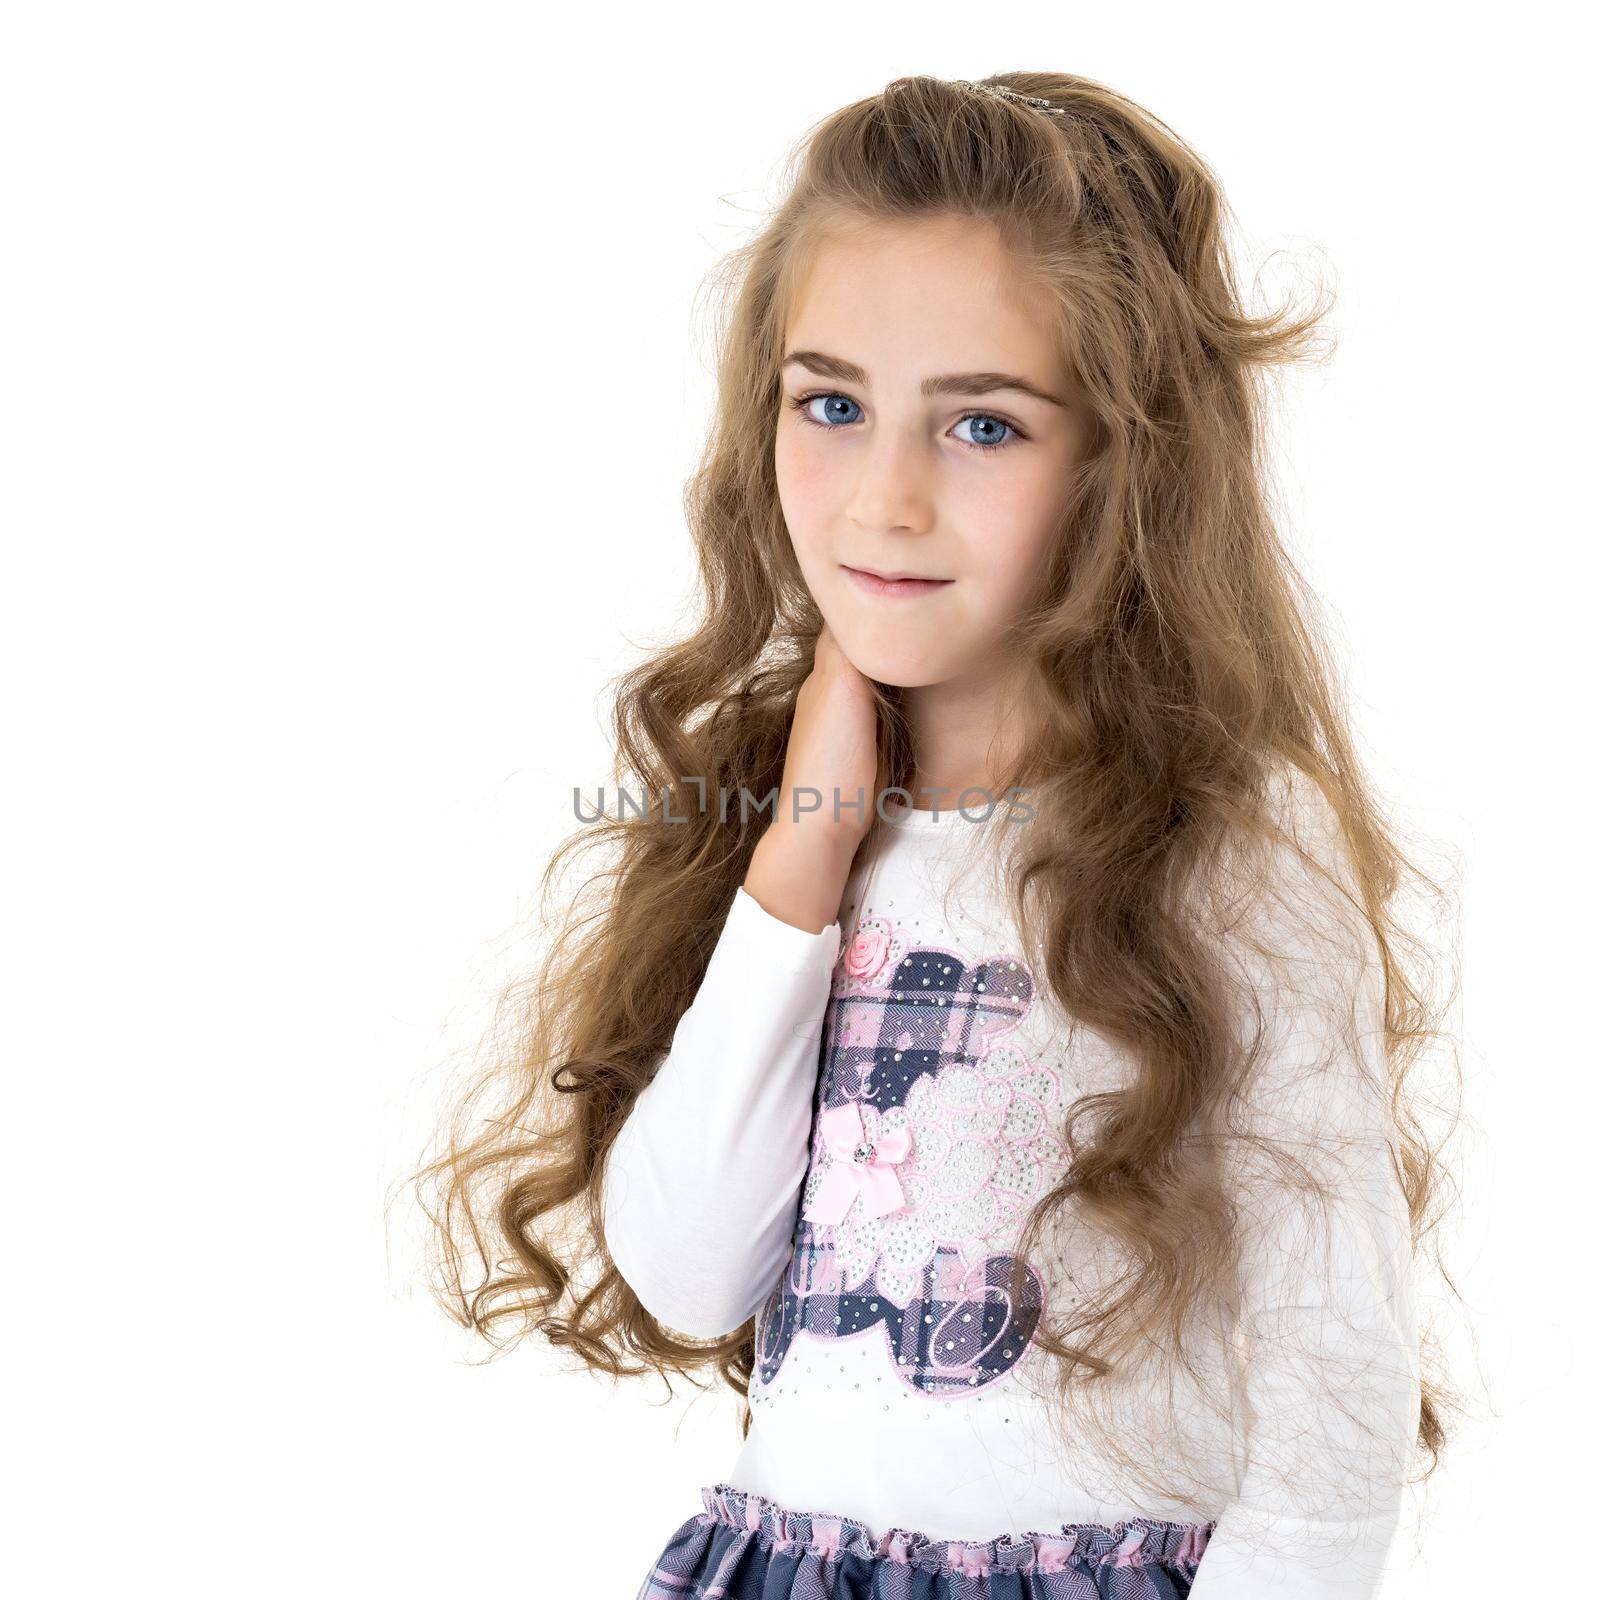 A charming little girl folded her hands around her face. The concept of beauty and fashion, children's emotions. Isolated on white background.